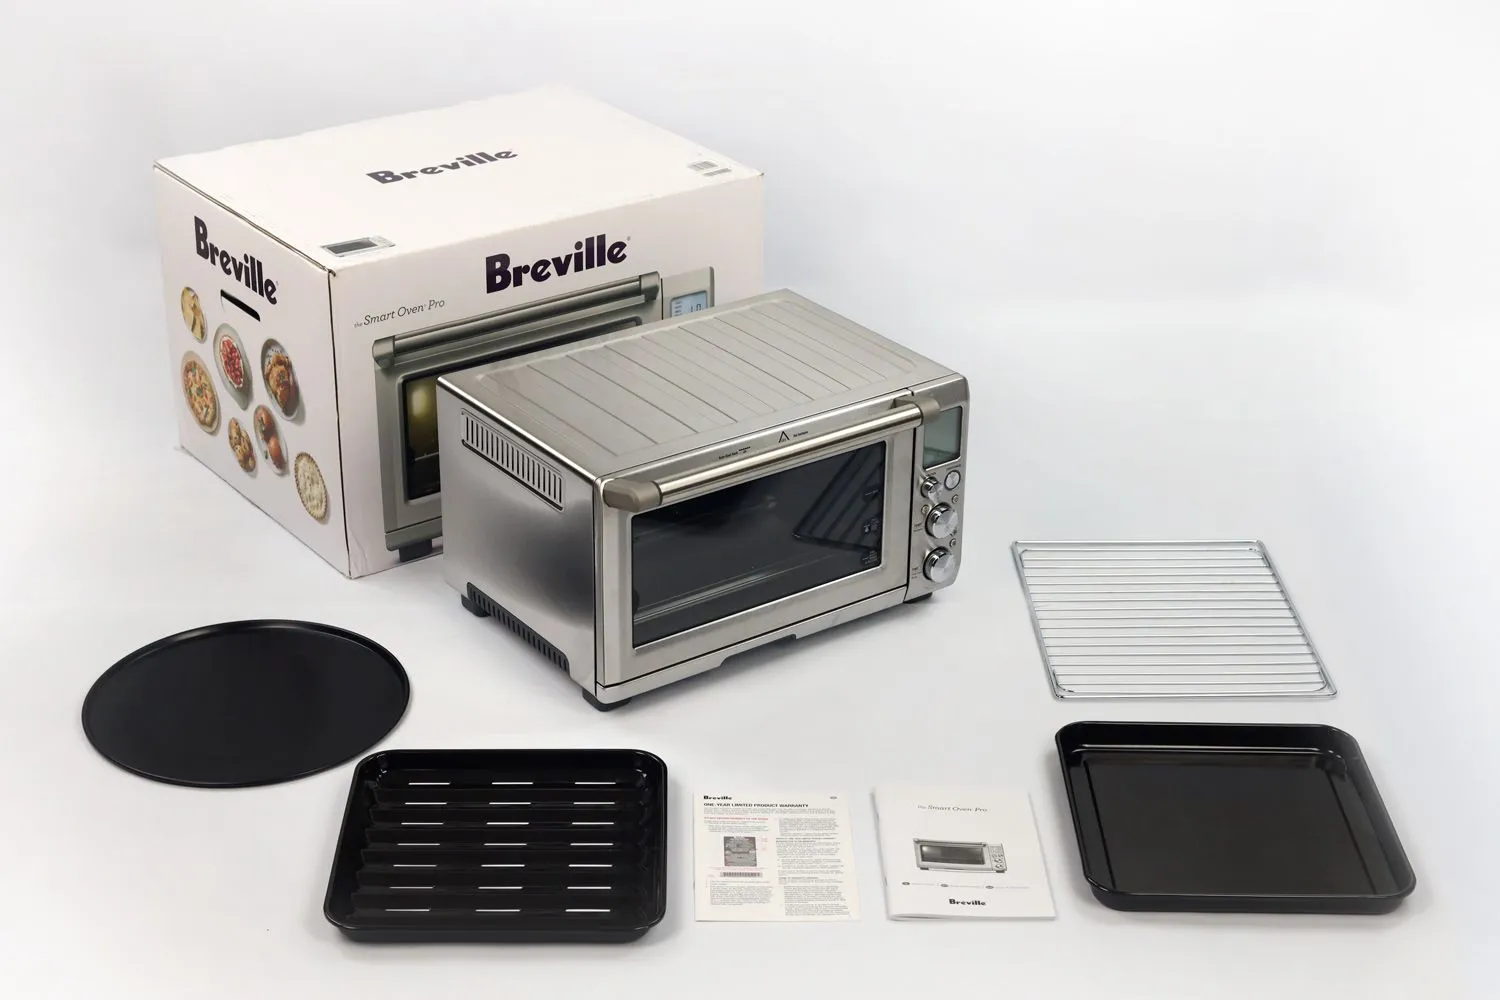 Breville The Smart Oven® Pro with Interior Light and Slow Cook Function